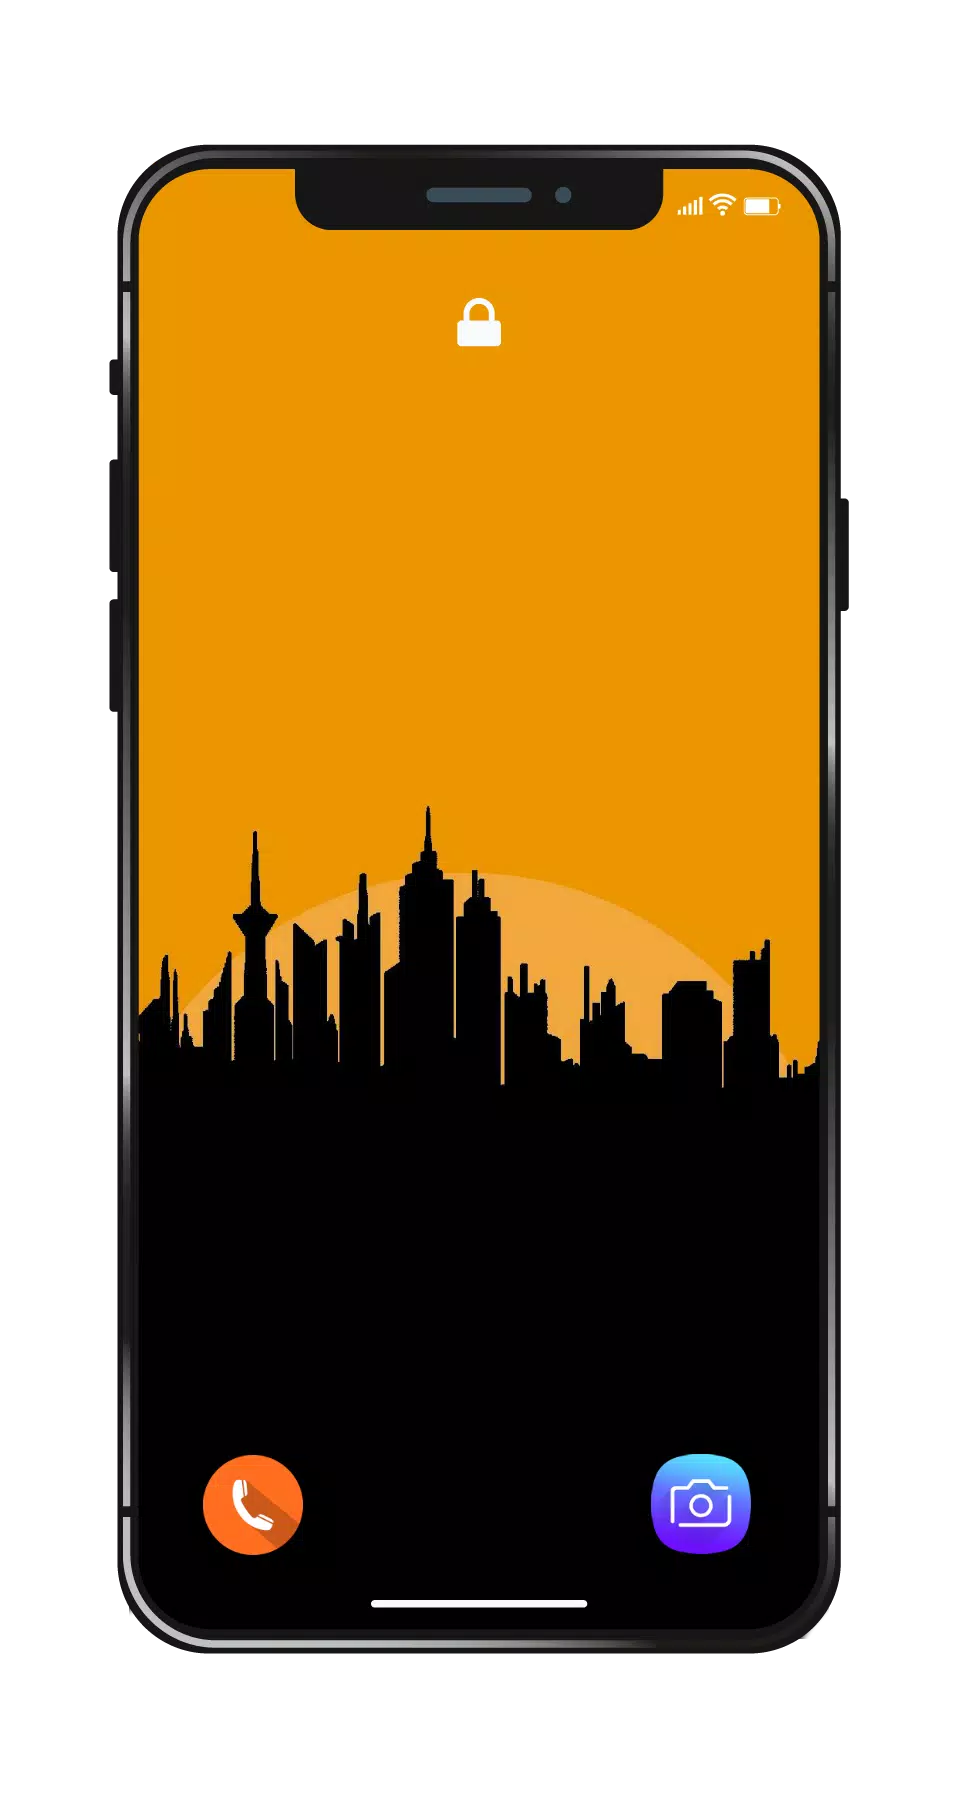 Ðlock screen wallpapers hd k lock backgrounds apk for android download